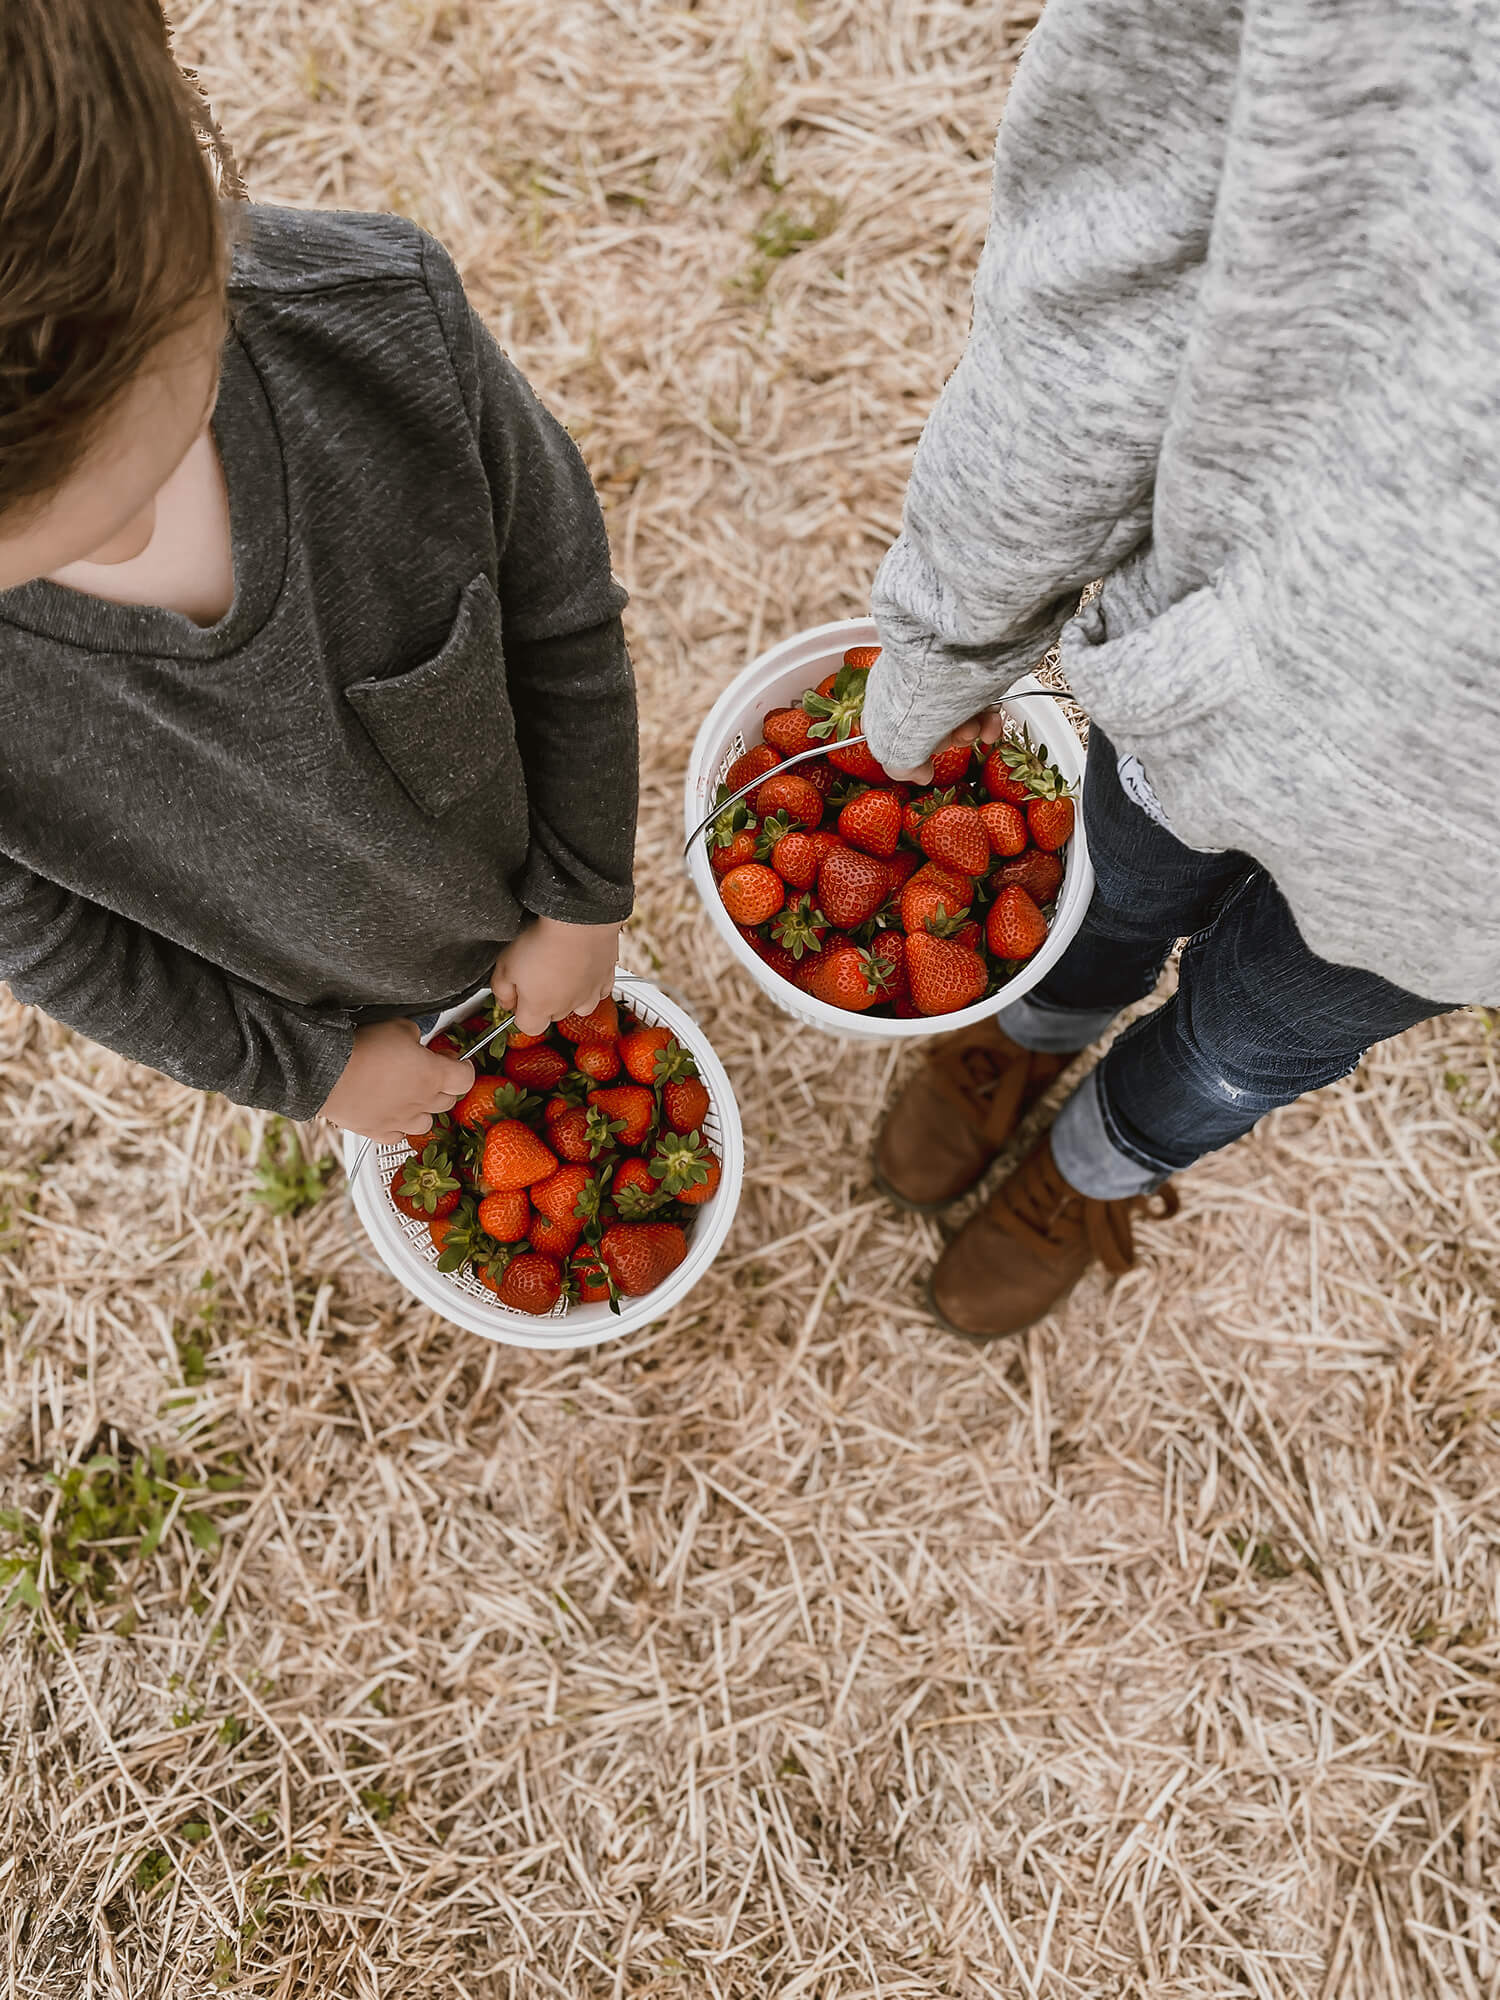 Strawberry picking in Nashville Tennessee and another edition of Casual Friday over on KaraLayne.com!